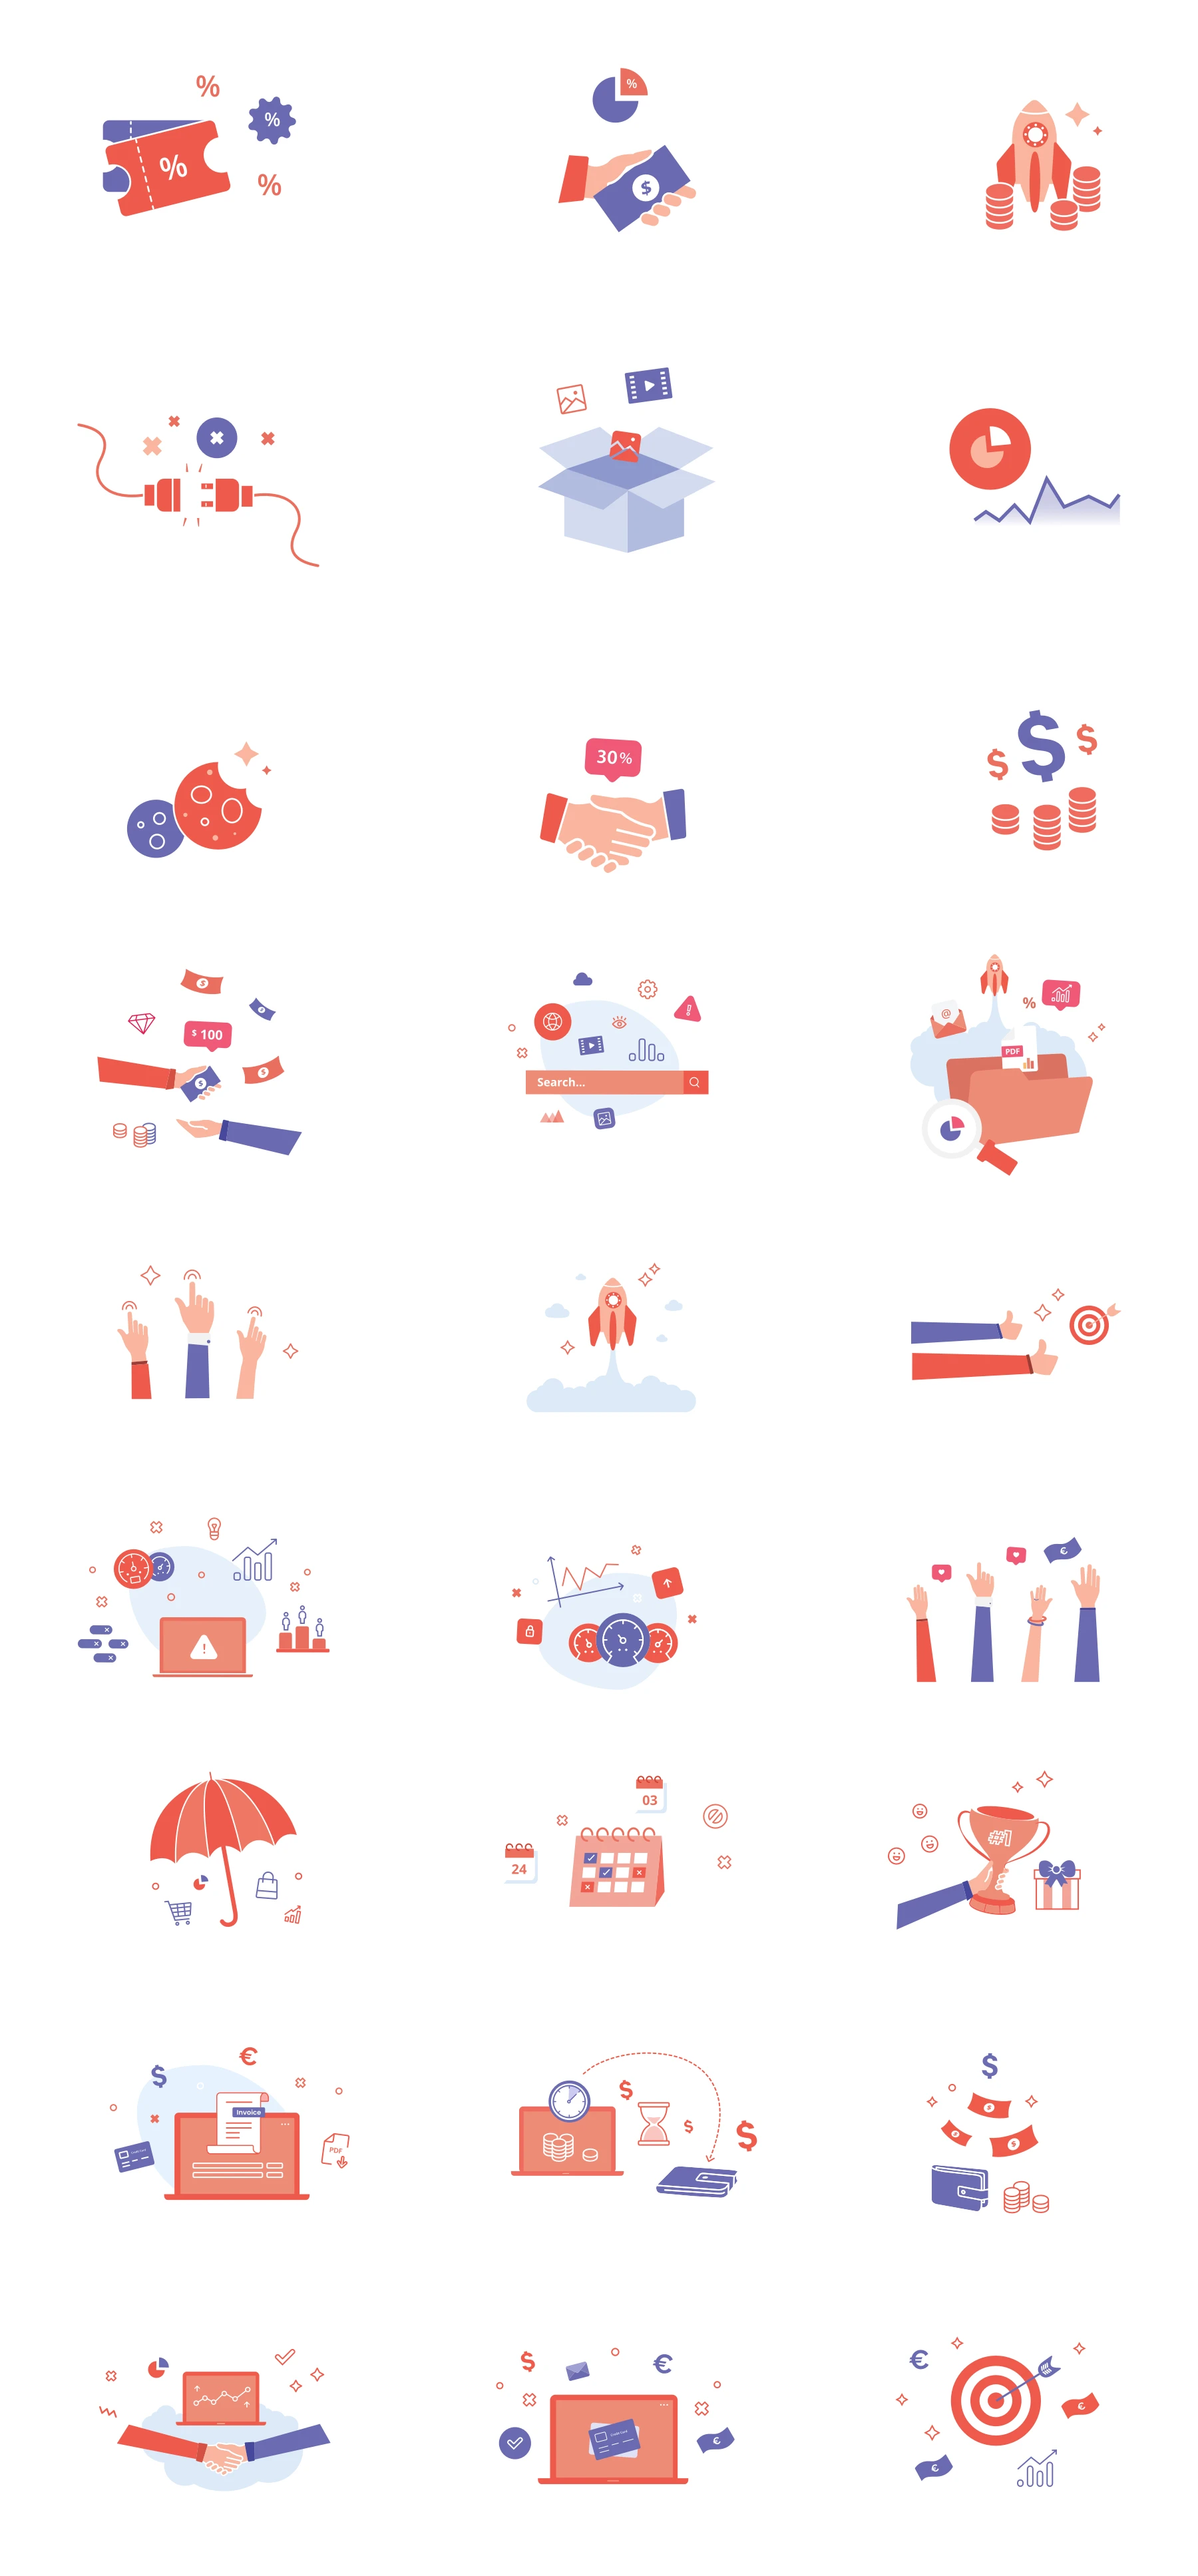 Colorful Free Icons - Icons are ready to use in your project right away. We designed them in Adobe Illustrator. They are 100% vector, with preserved layers, you will be able to edit them easily. The file contains icons in two styles: 27 full-color icons and 27 slim icons.